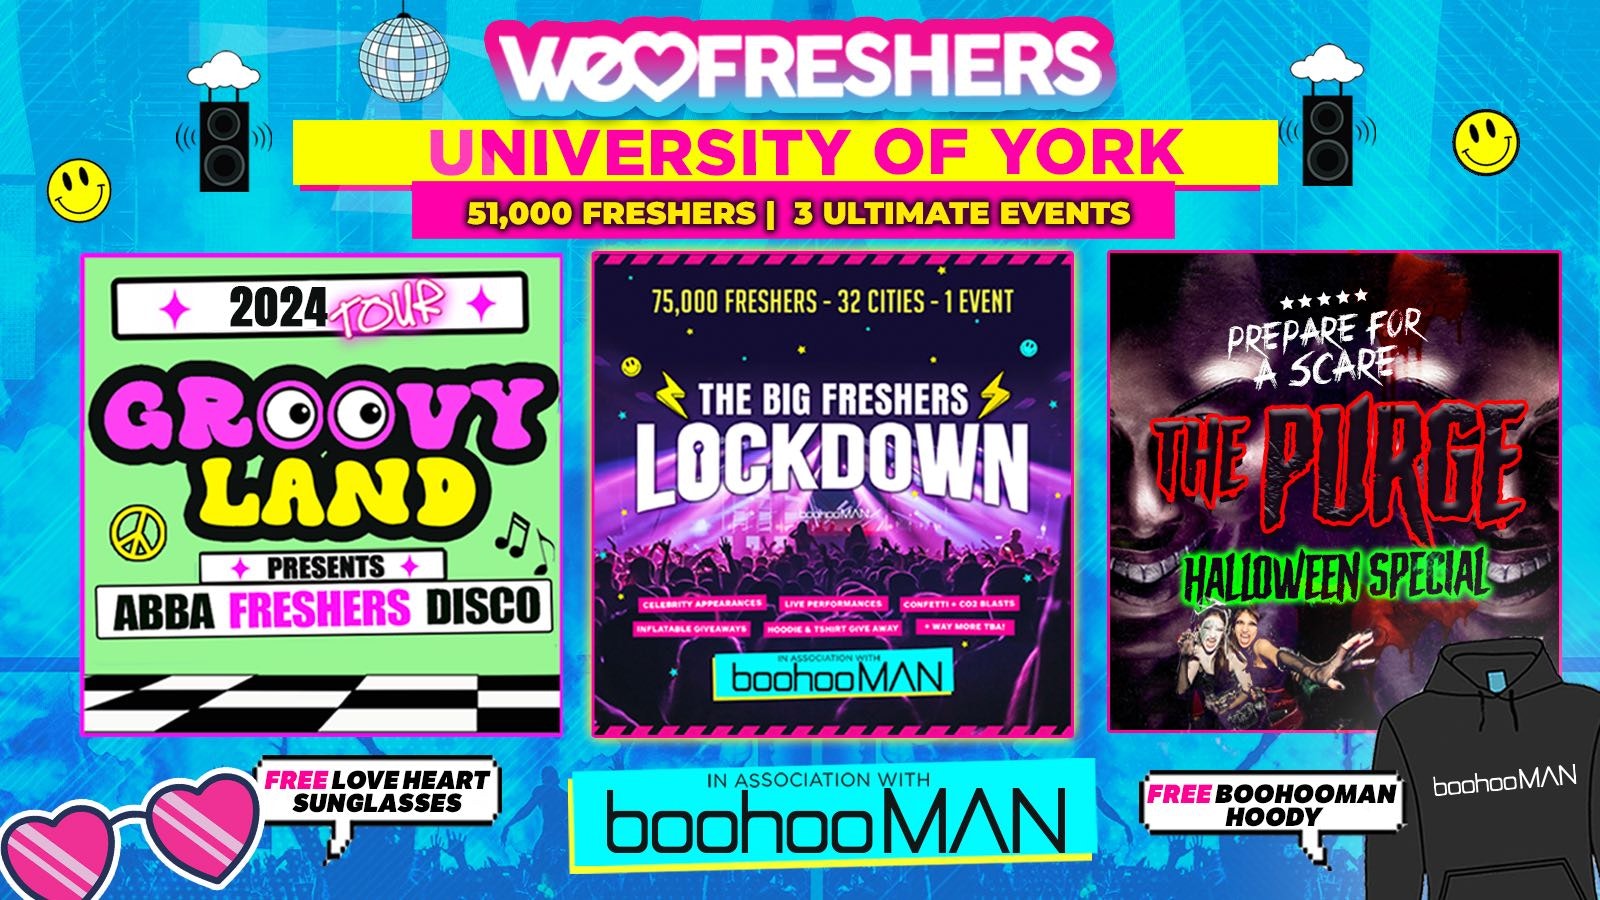 WE LOVE – UNI OF YORK FRESHERS 2024 in association with boohooMAN ❗3 EVENTS ❗